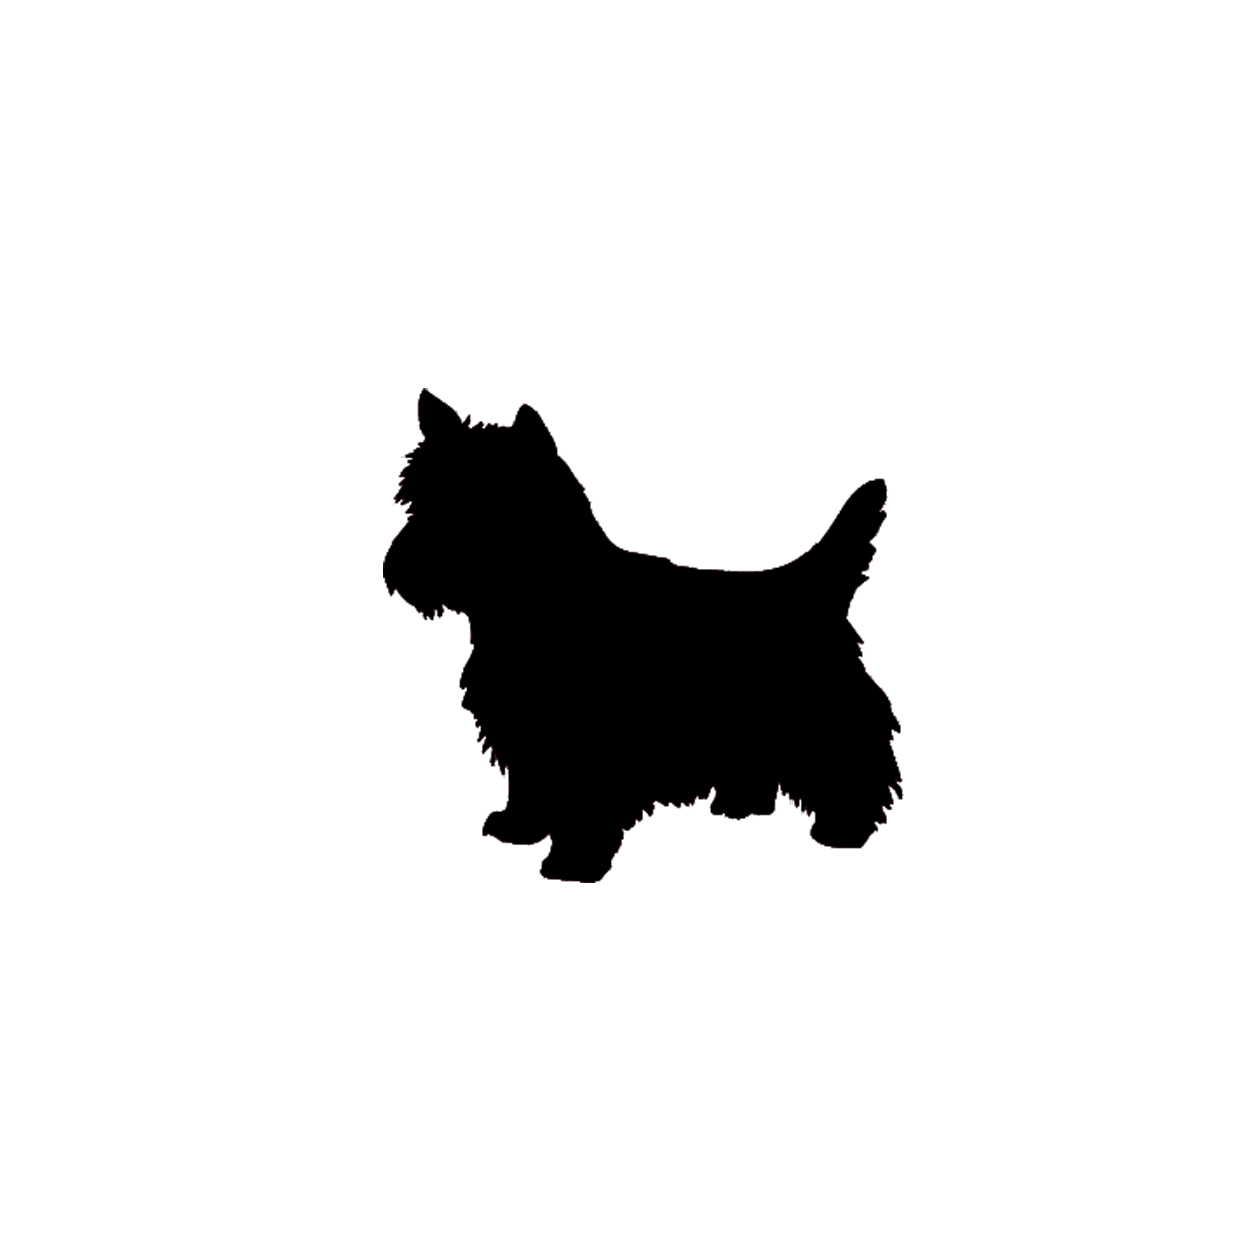 Dog And Cat Silhouette Clip Art Free | Clipart Panda - Free ...